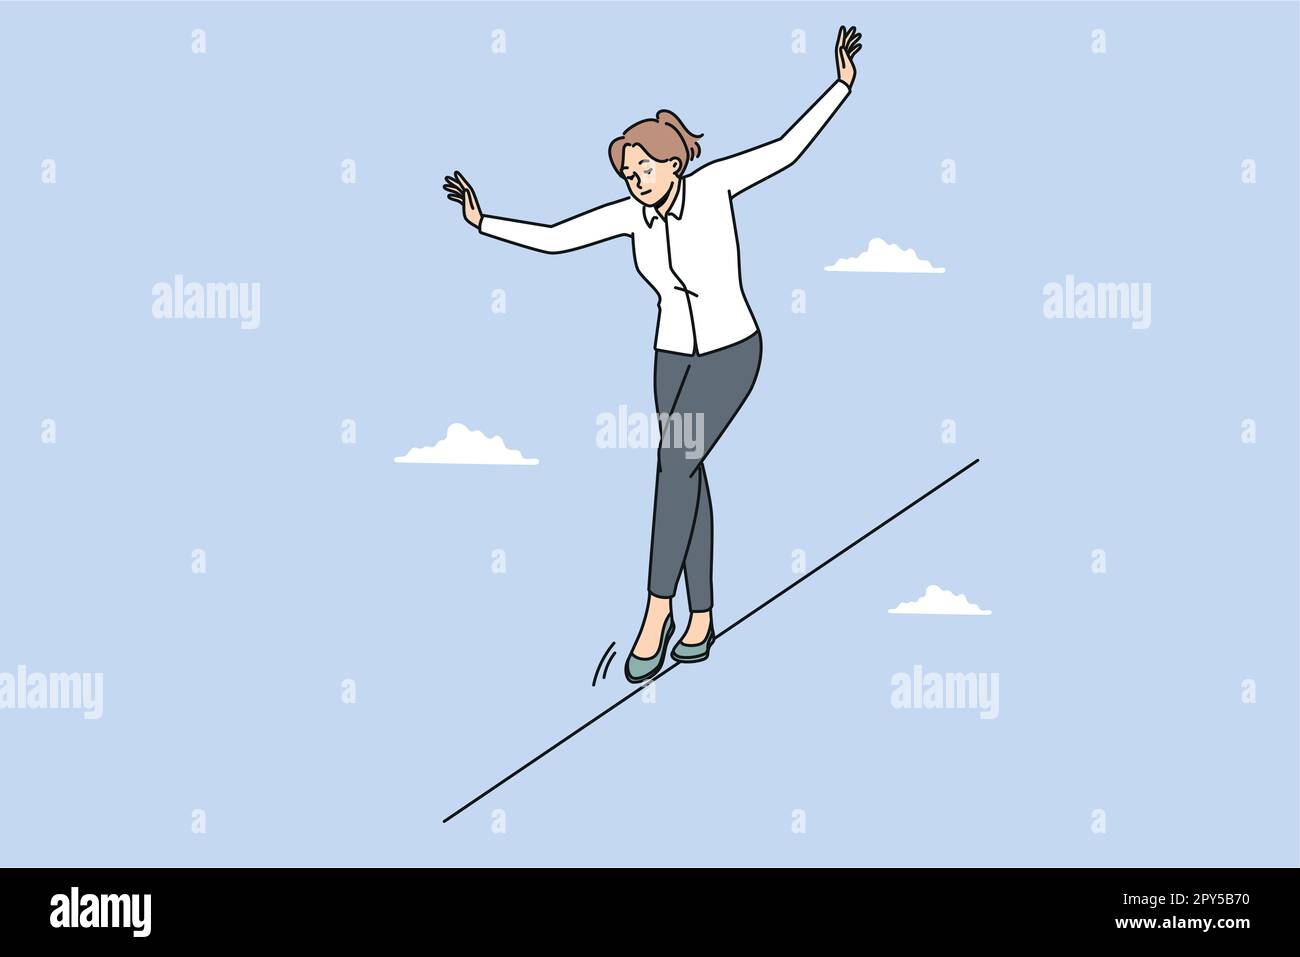 The Administrative Tightrope and Finding Balance – An Educator's